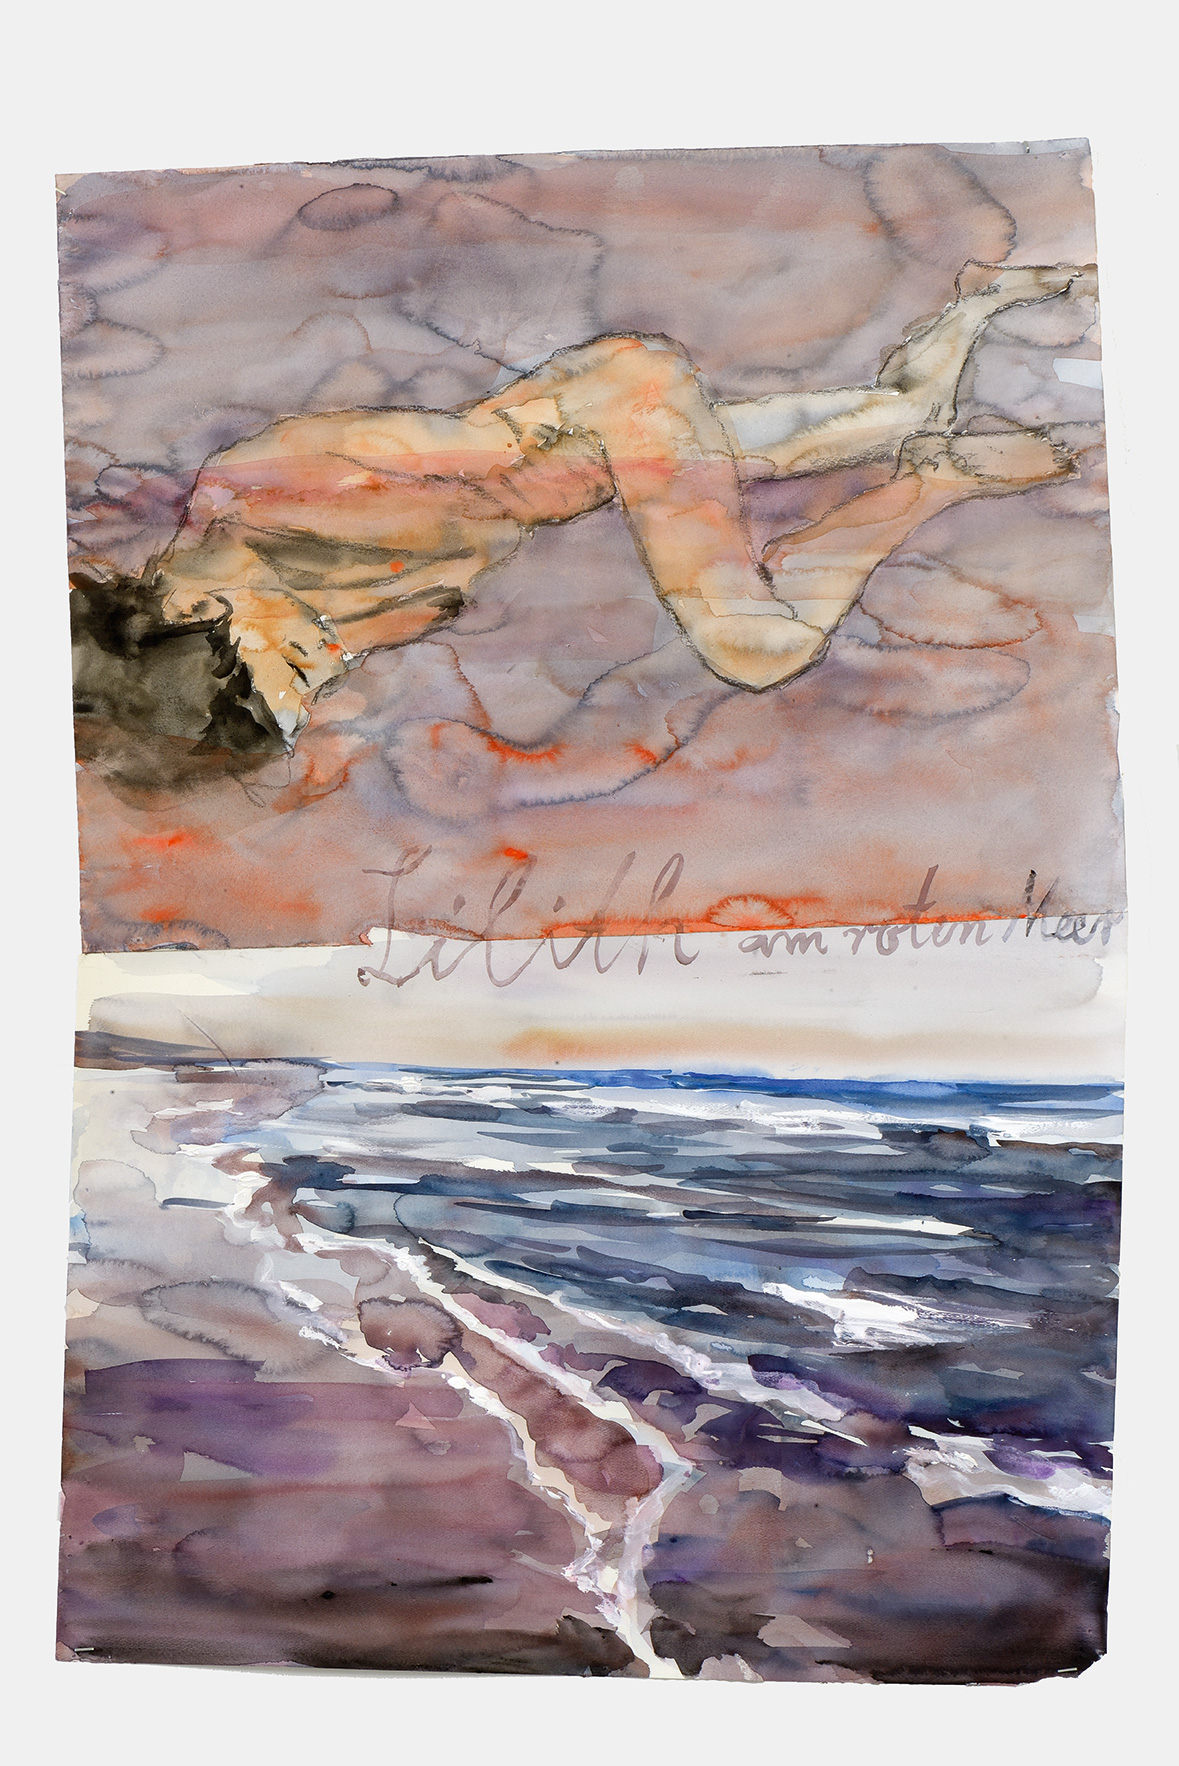 Lilith am Roten Meer (2012) by Anselm Kiefer. As reproduced in The Art of the Erotic